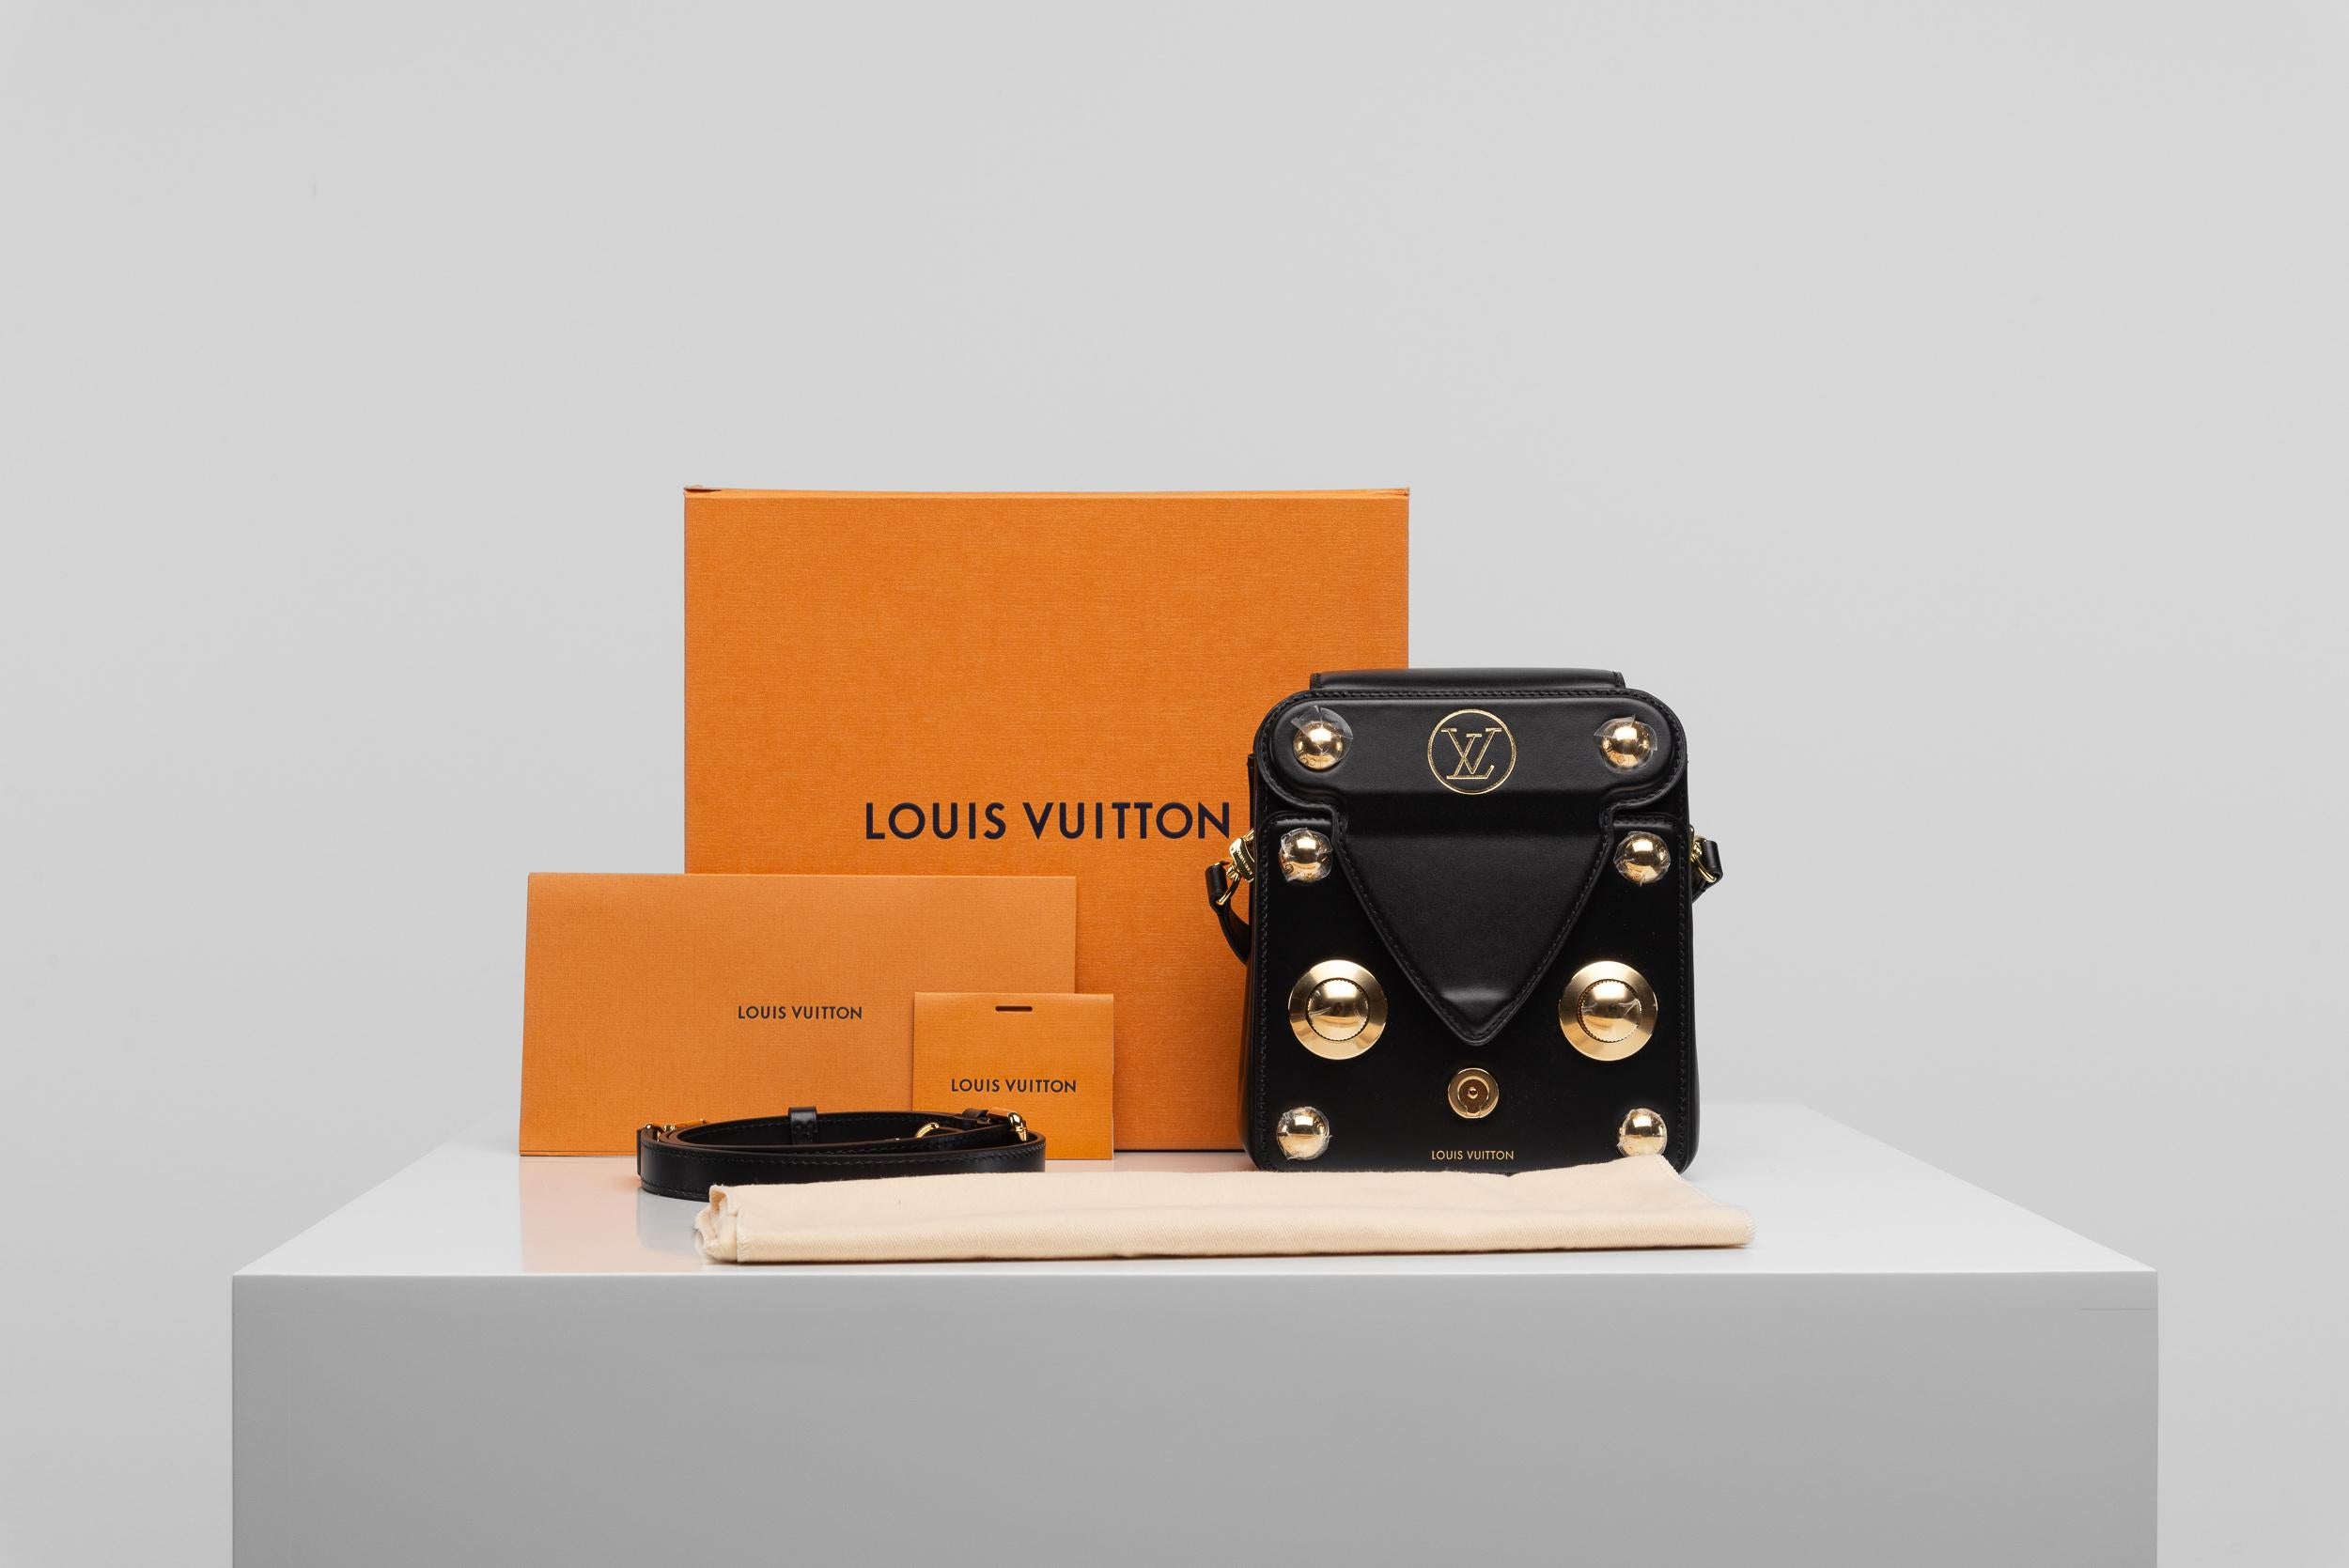 From the collection of SAVINETI we offer this Louis Vuitton S-Lock XL Bag:
- Brand: Louis Vuitton
- Model: S-Lock XL (Spring-Summer 2023 collection)
- Condition: NEW (unused) - protective foil still on
- Year: 2023
- Materials: calfskin, gold-color